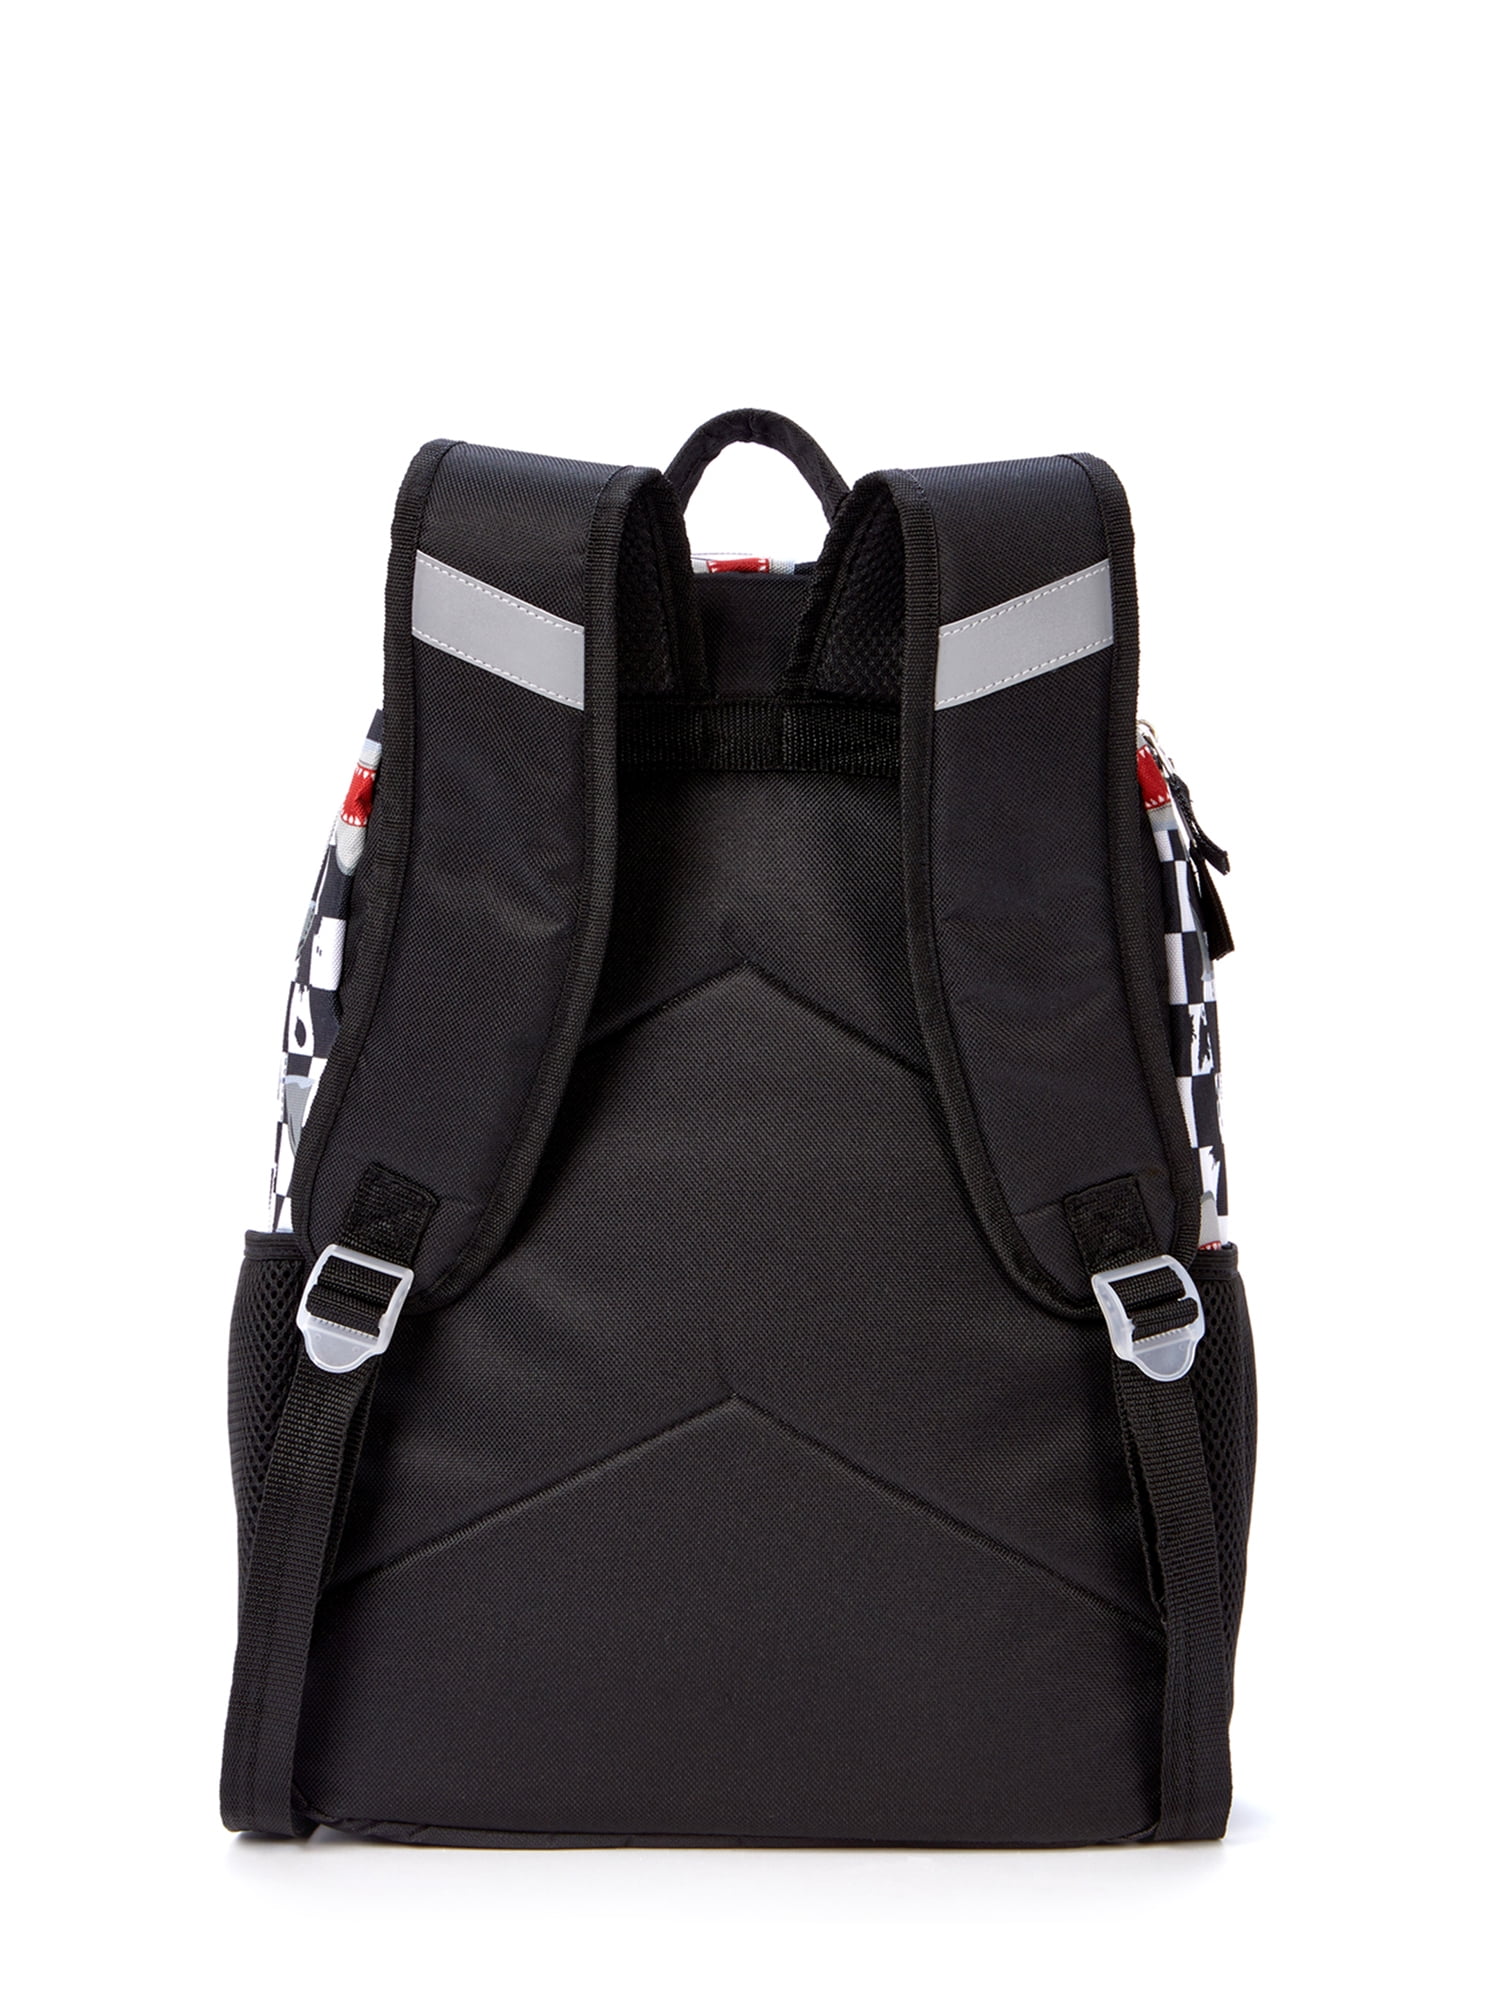 OMG Accessories Black Checkerboard Skater Shark Backpack & Lunch Bag Set, Best Price and Reviews